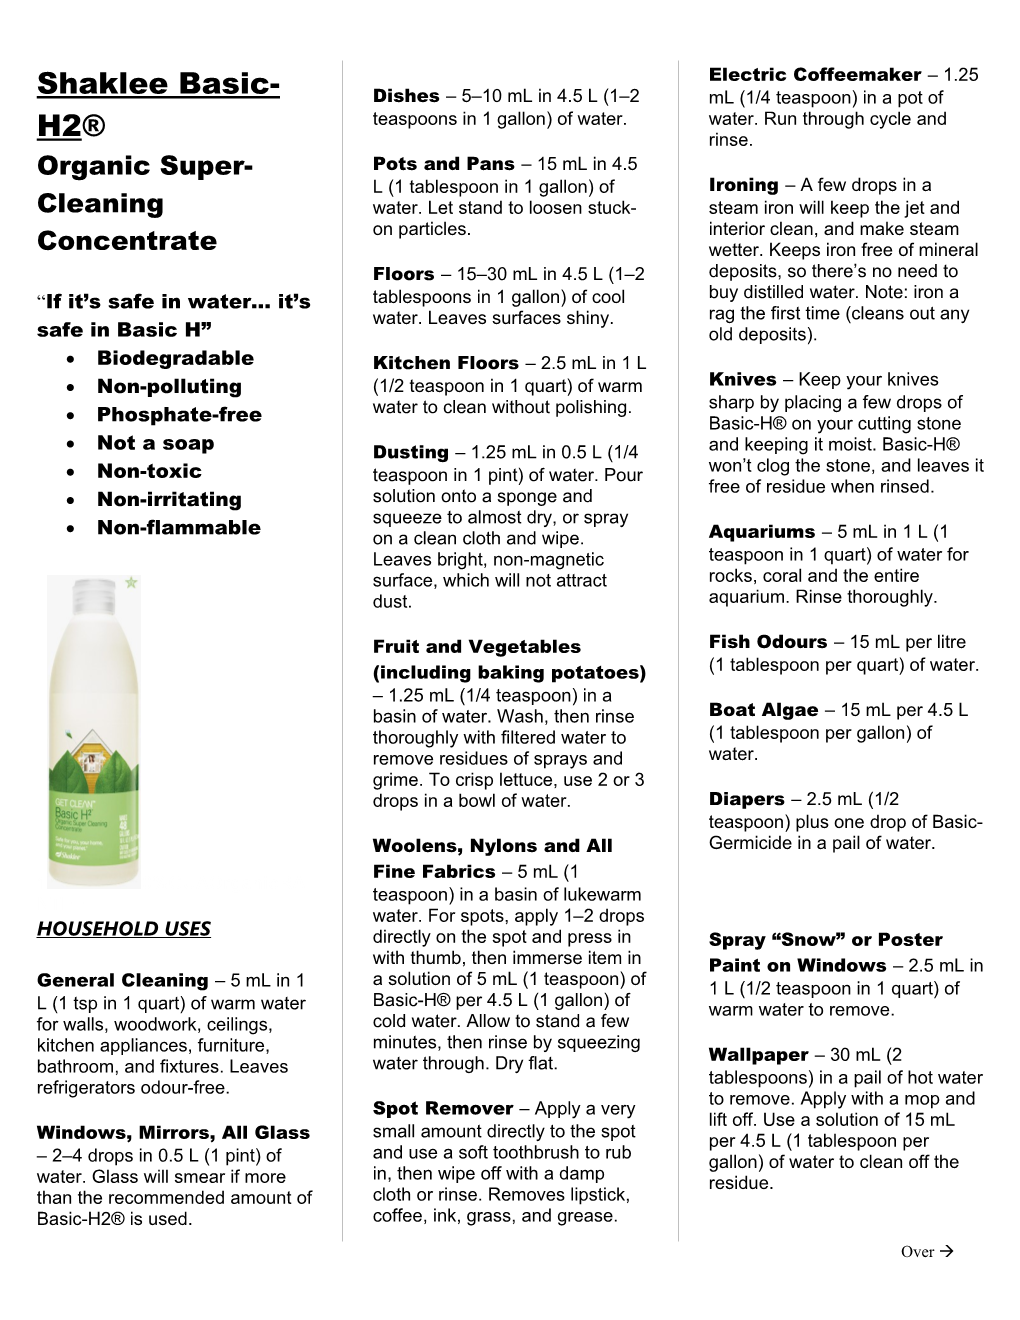 Organic Super-Cleaning Concentrate